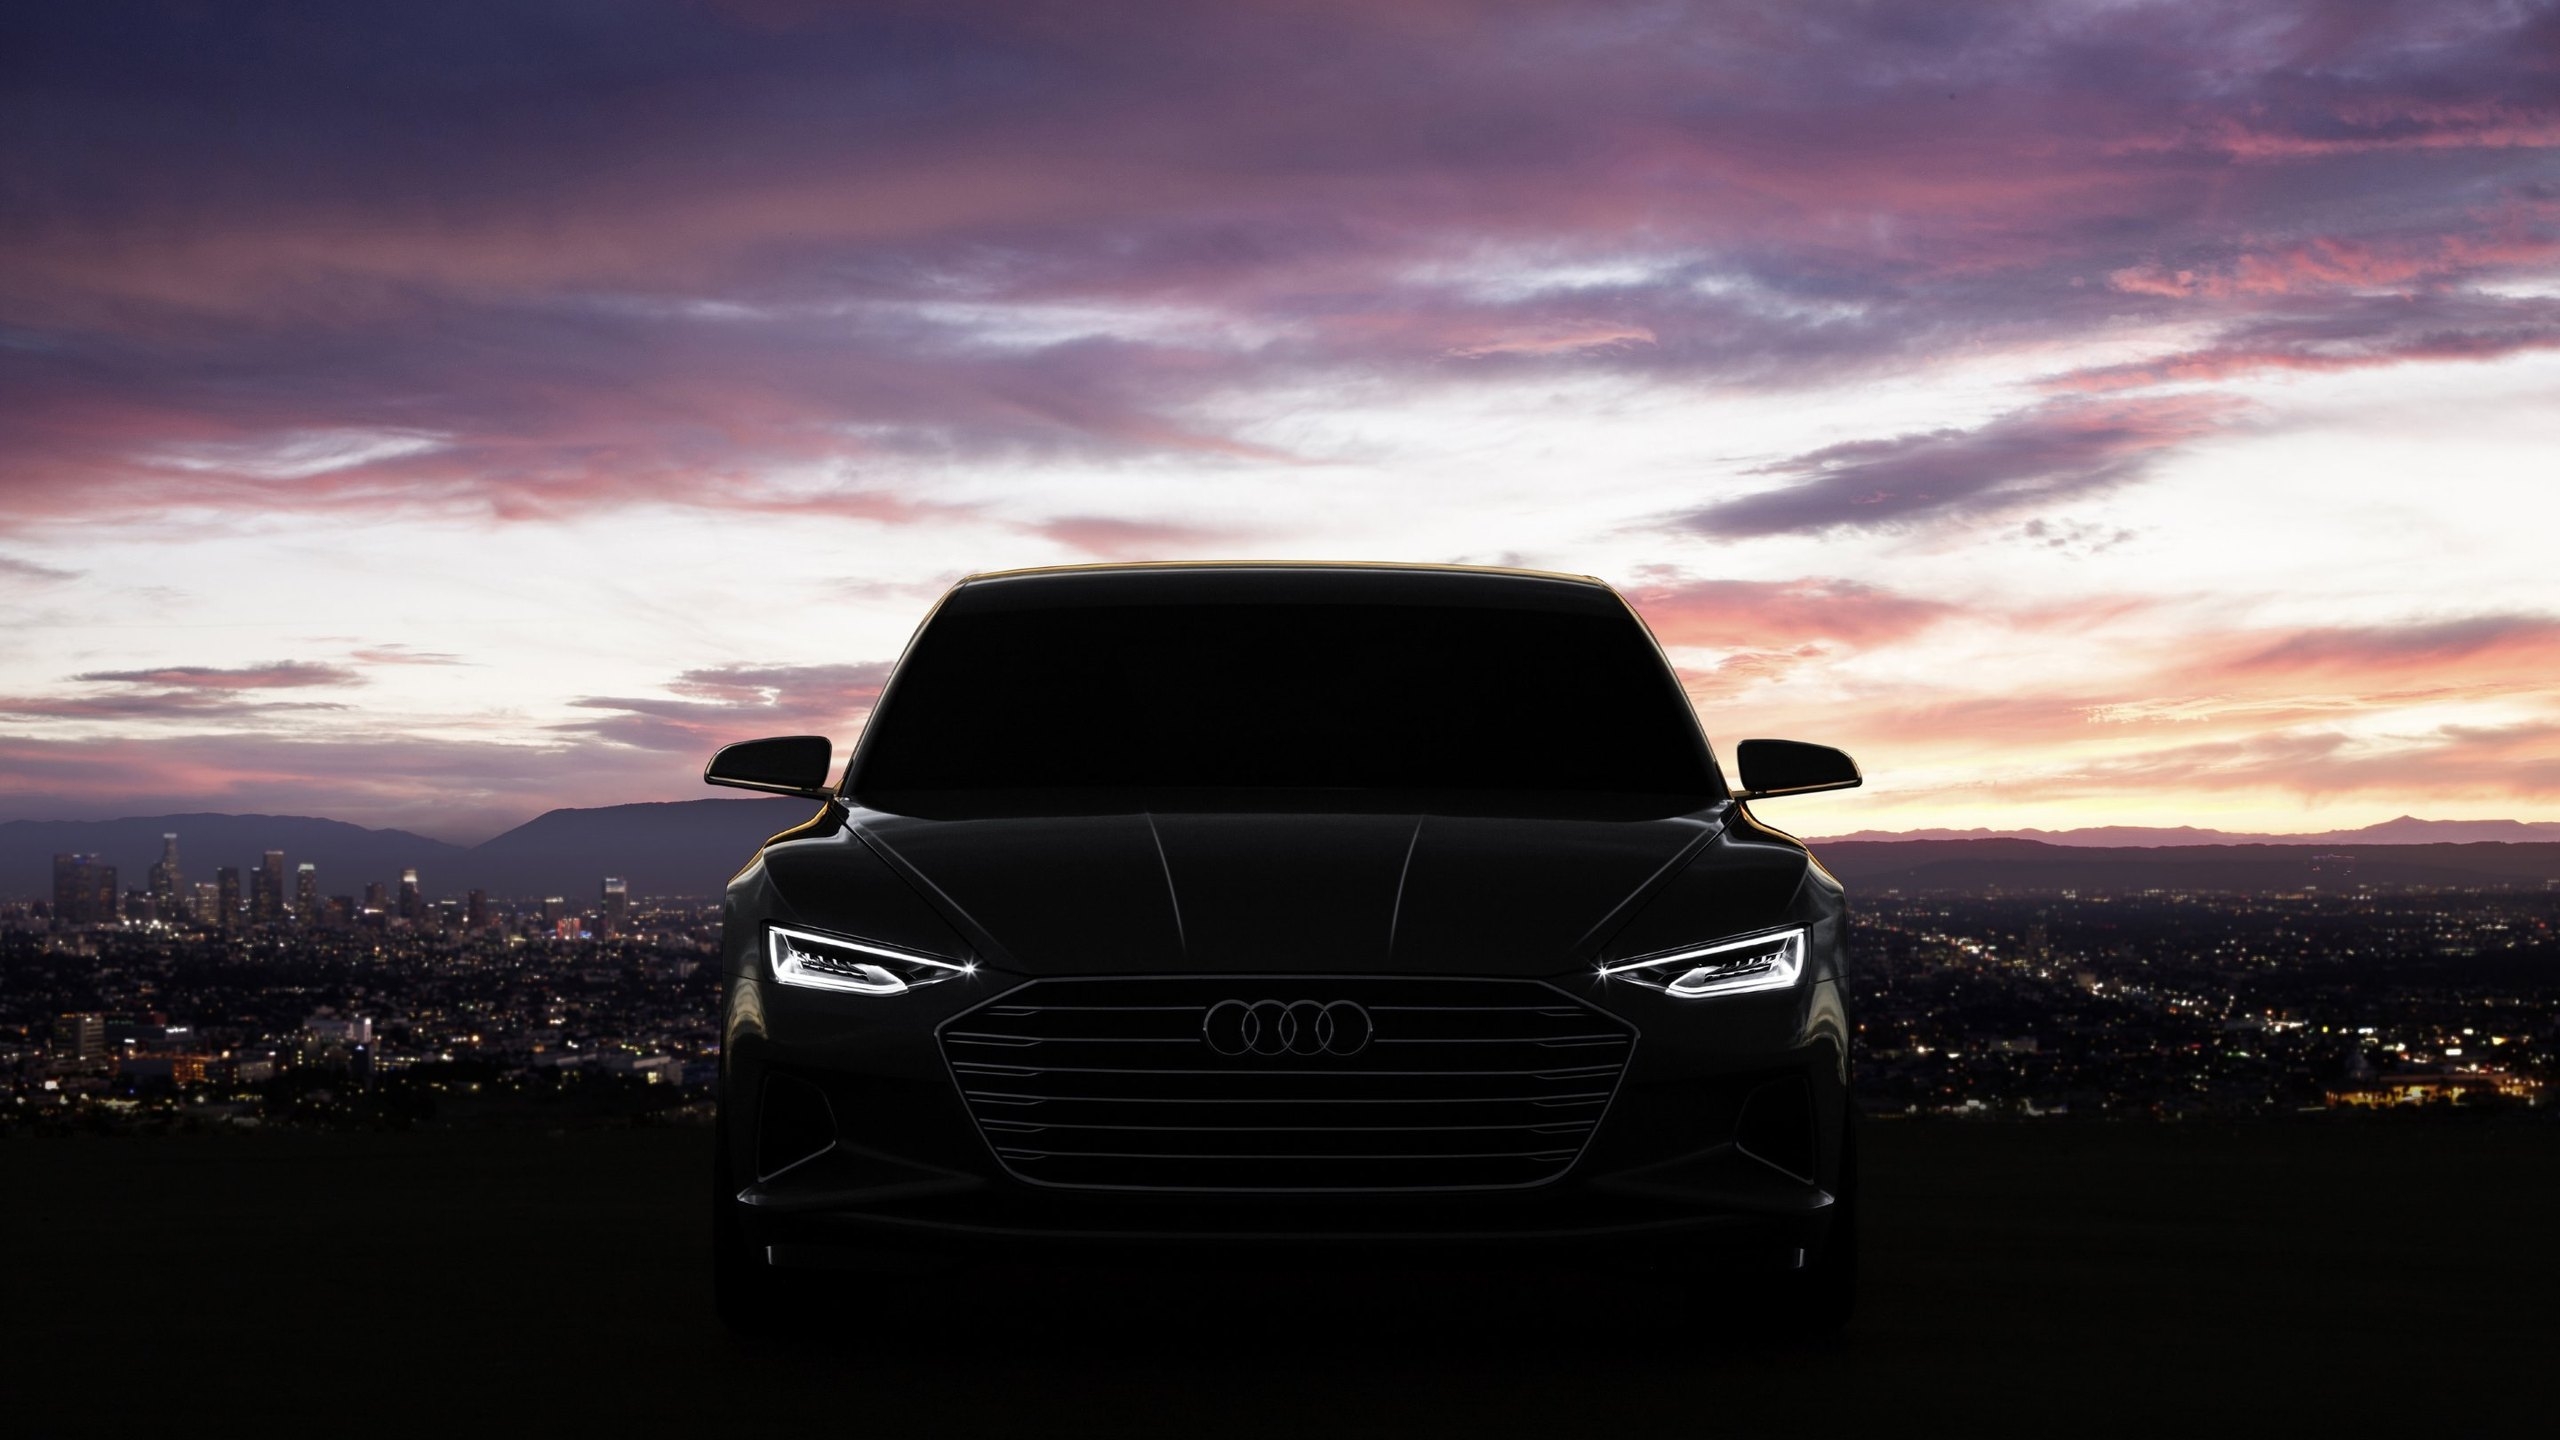 Audi Prologue Concept for 2560x1440 HDTV resolution